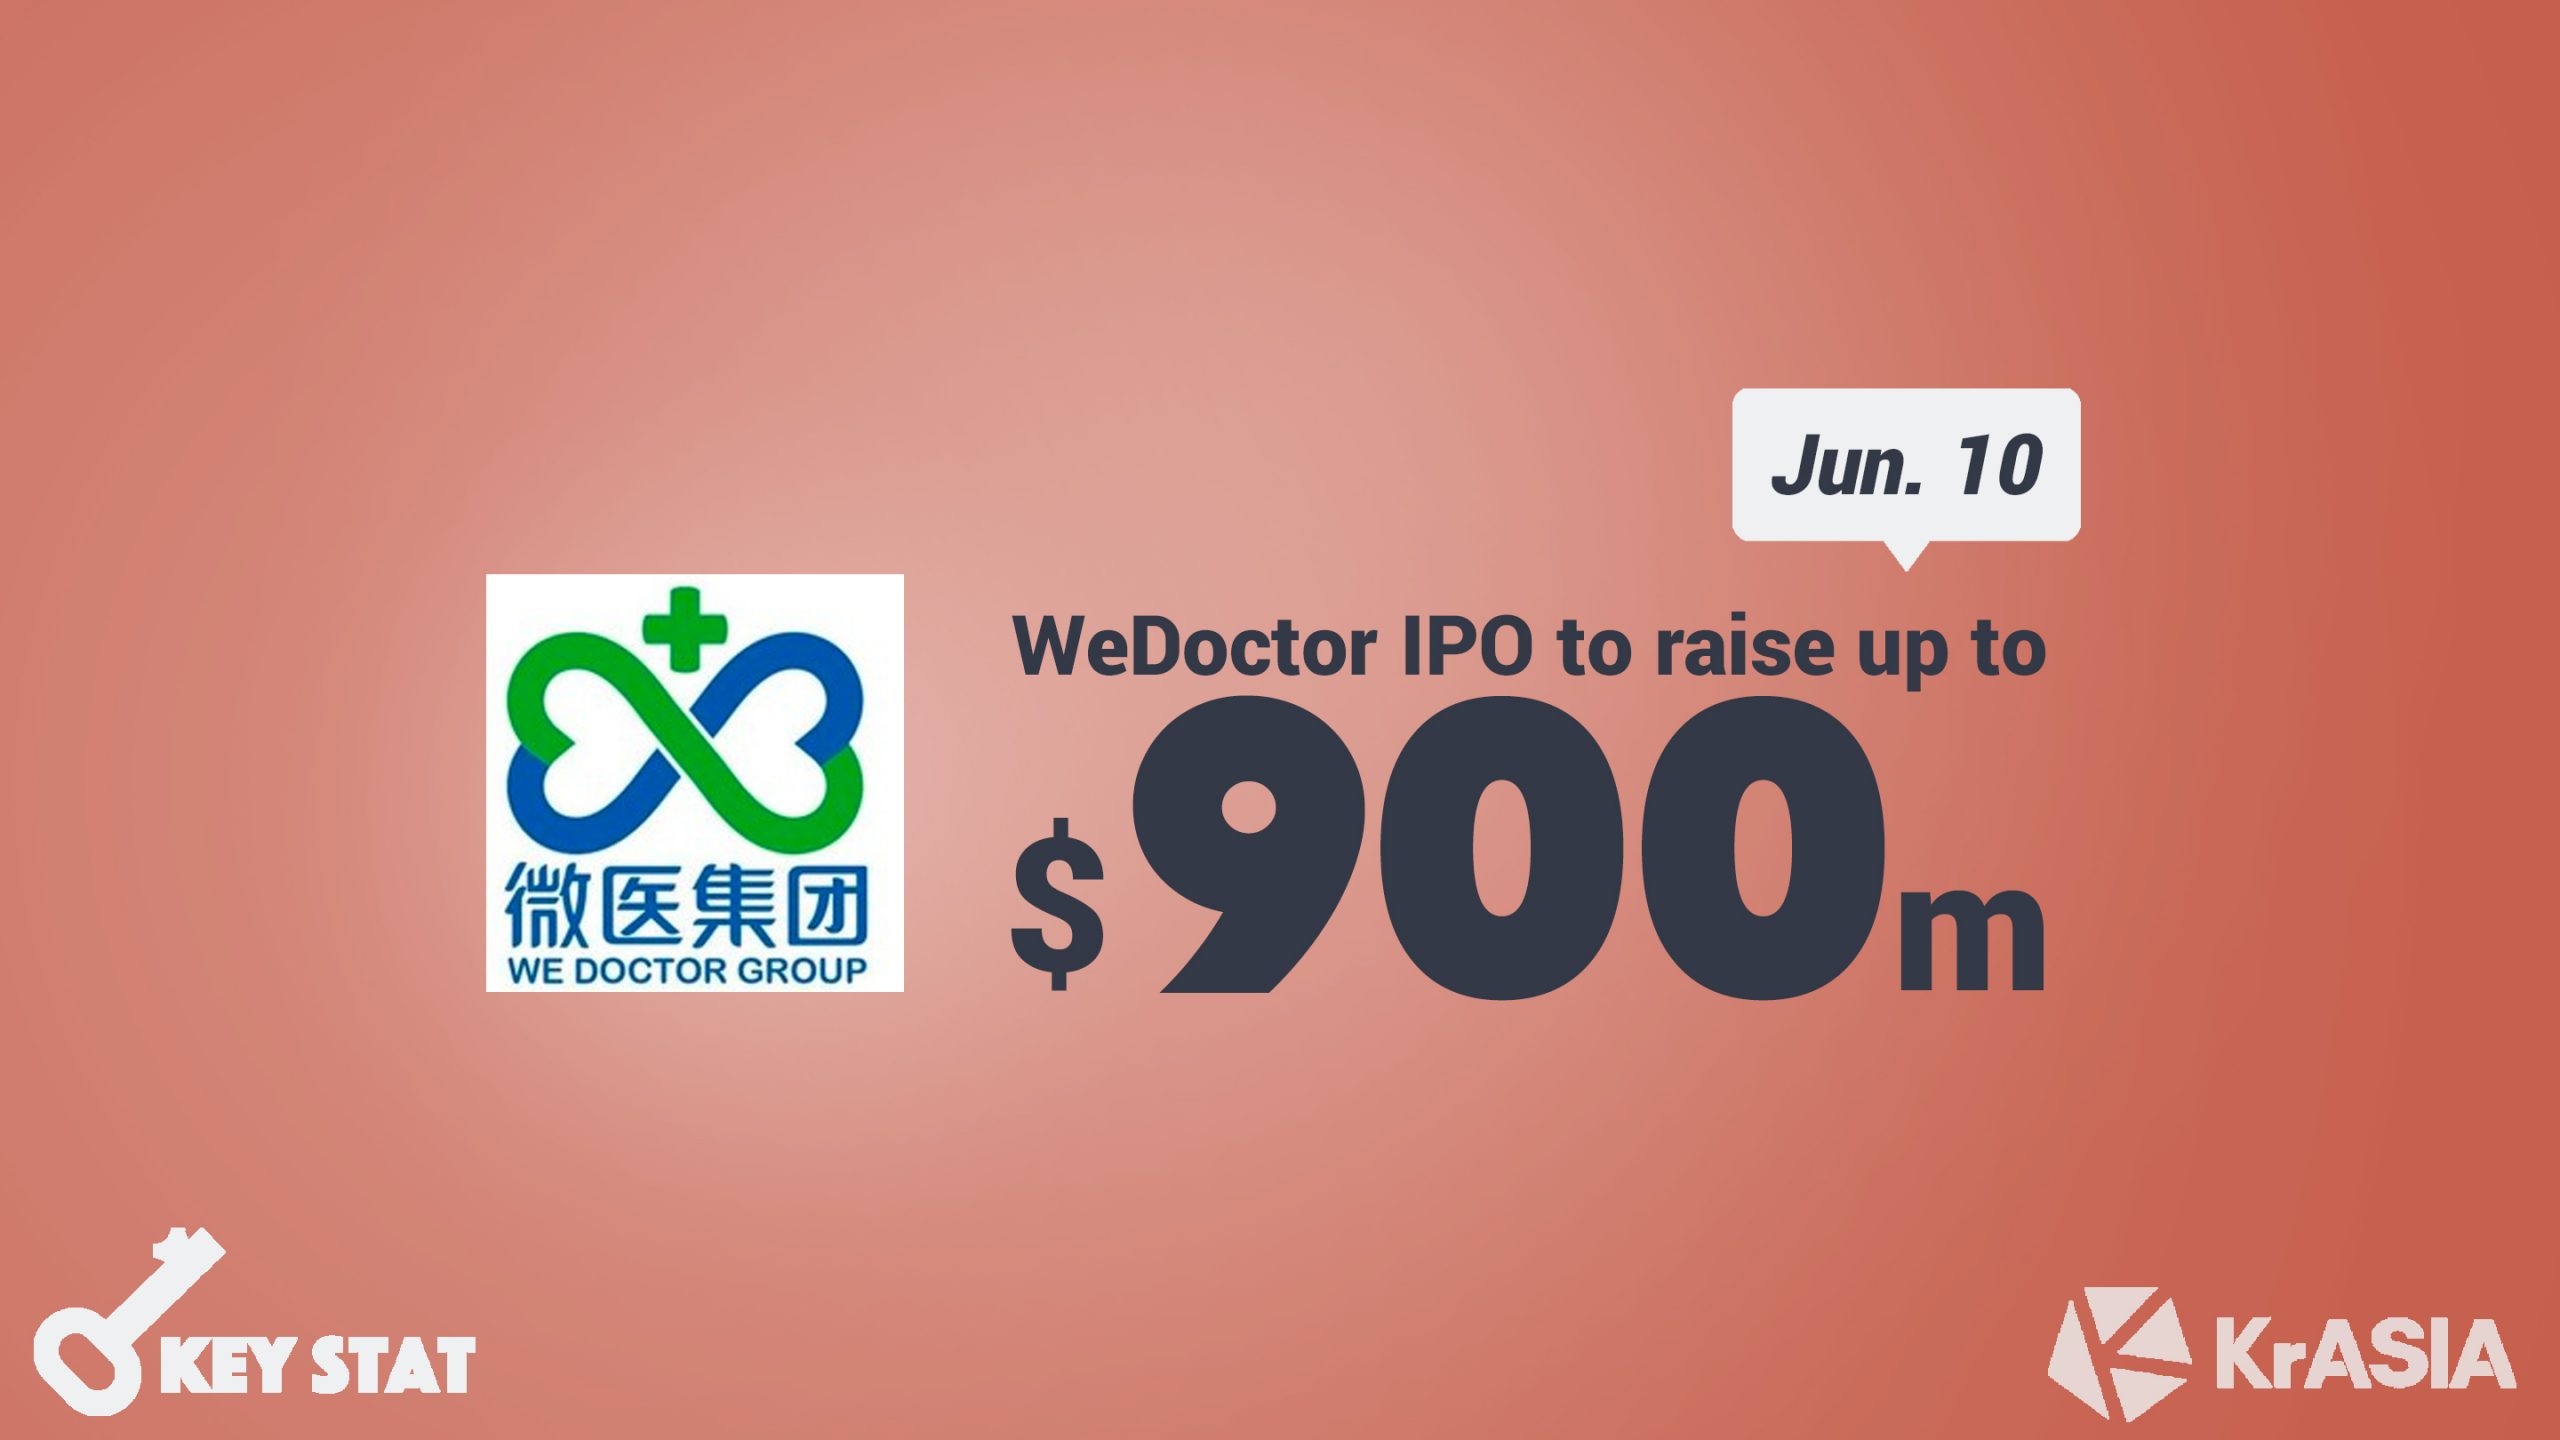 KEY STAT | Tencent-backed healthtech WeDoctor plans USD 900 million Hong Kong IPO